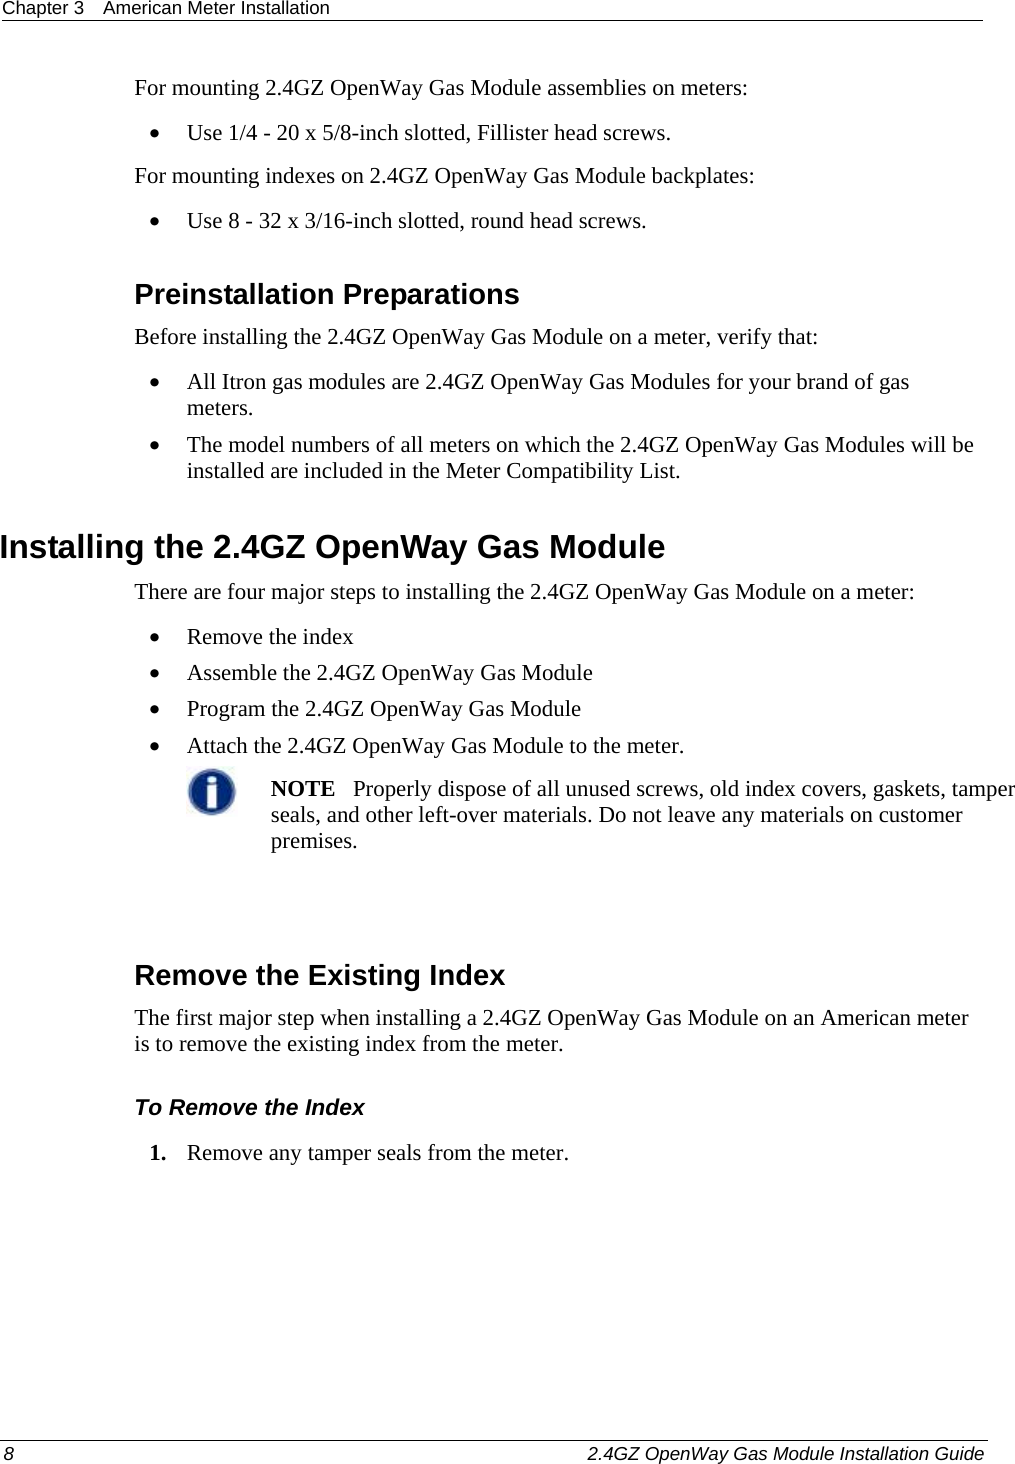 Chapter 3  American Meter Installation  8    2.4GZ OpenWay Gas Module Installation Guide  For mounting 2.4GZ OpenWay Gas Module assemblies on meters: • Use 1/4 - 20 x 5/8-inch slotted, Fillister head screws. For mounting indexes on 2.4GZ OpenWay Gas Module backplates: • Use 8 - 32 x 3/16-inch slotted, round head screws.  Preinstallation Preparations Before installing the 2.4GZ OpenWay Gas Module on a meter, verify that:   • All Itron gas modules are 2.4GZ OpenWay Gas Modules for your brand of gas meters.  • The model numbers of all meters on which the 2.4GZ OpenWay Gas Modules will be installed are included in the Meter Compatibility List.  Installing the 2.4GZ OpenWay Gas Module There are four major steps to installing the 2.4GZ OpenWay Gas Module on a meter: • Remove the index • Assemble the 2.4GZ OpenWay Gas Module • Program the 2.4GZ OpenWay Gas Module • Attach the 2.4GZ OpenWay Gas Module to the meter.  NOTE   Properly dispose of all unused screws, old index covers, gaskets, tamper seals, and other left-over materials. Do not leave any materials on customer premises.    Remove the Existing Index The first major step when installing a 2.4GZ OpenWay Gas Module on an American meter is to remove the existing index from the meter. To Remove the Index 1. Remove any tamper seals from the meter.  